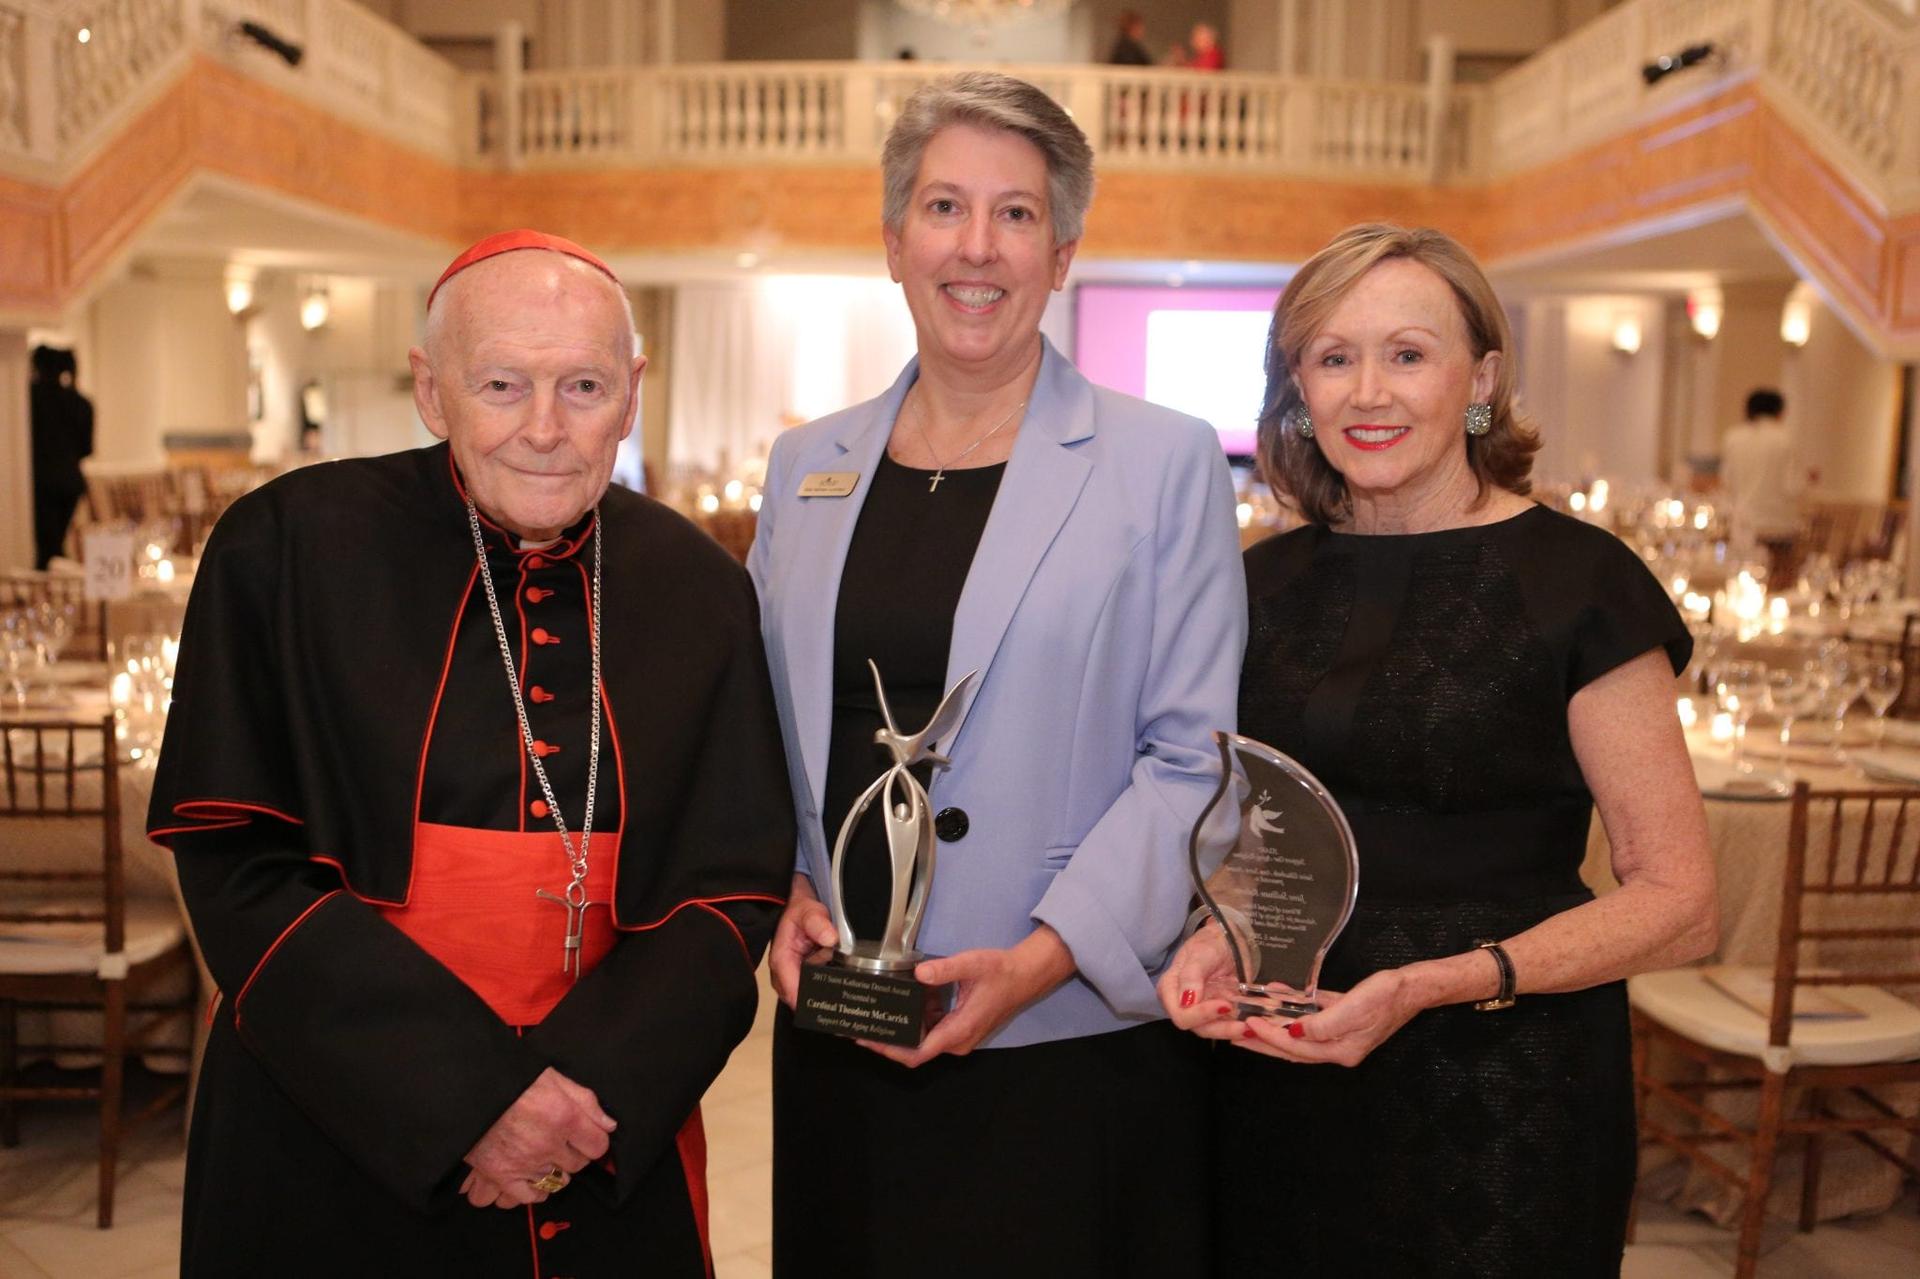 Time to give back to retired religious for service to church, say honorees